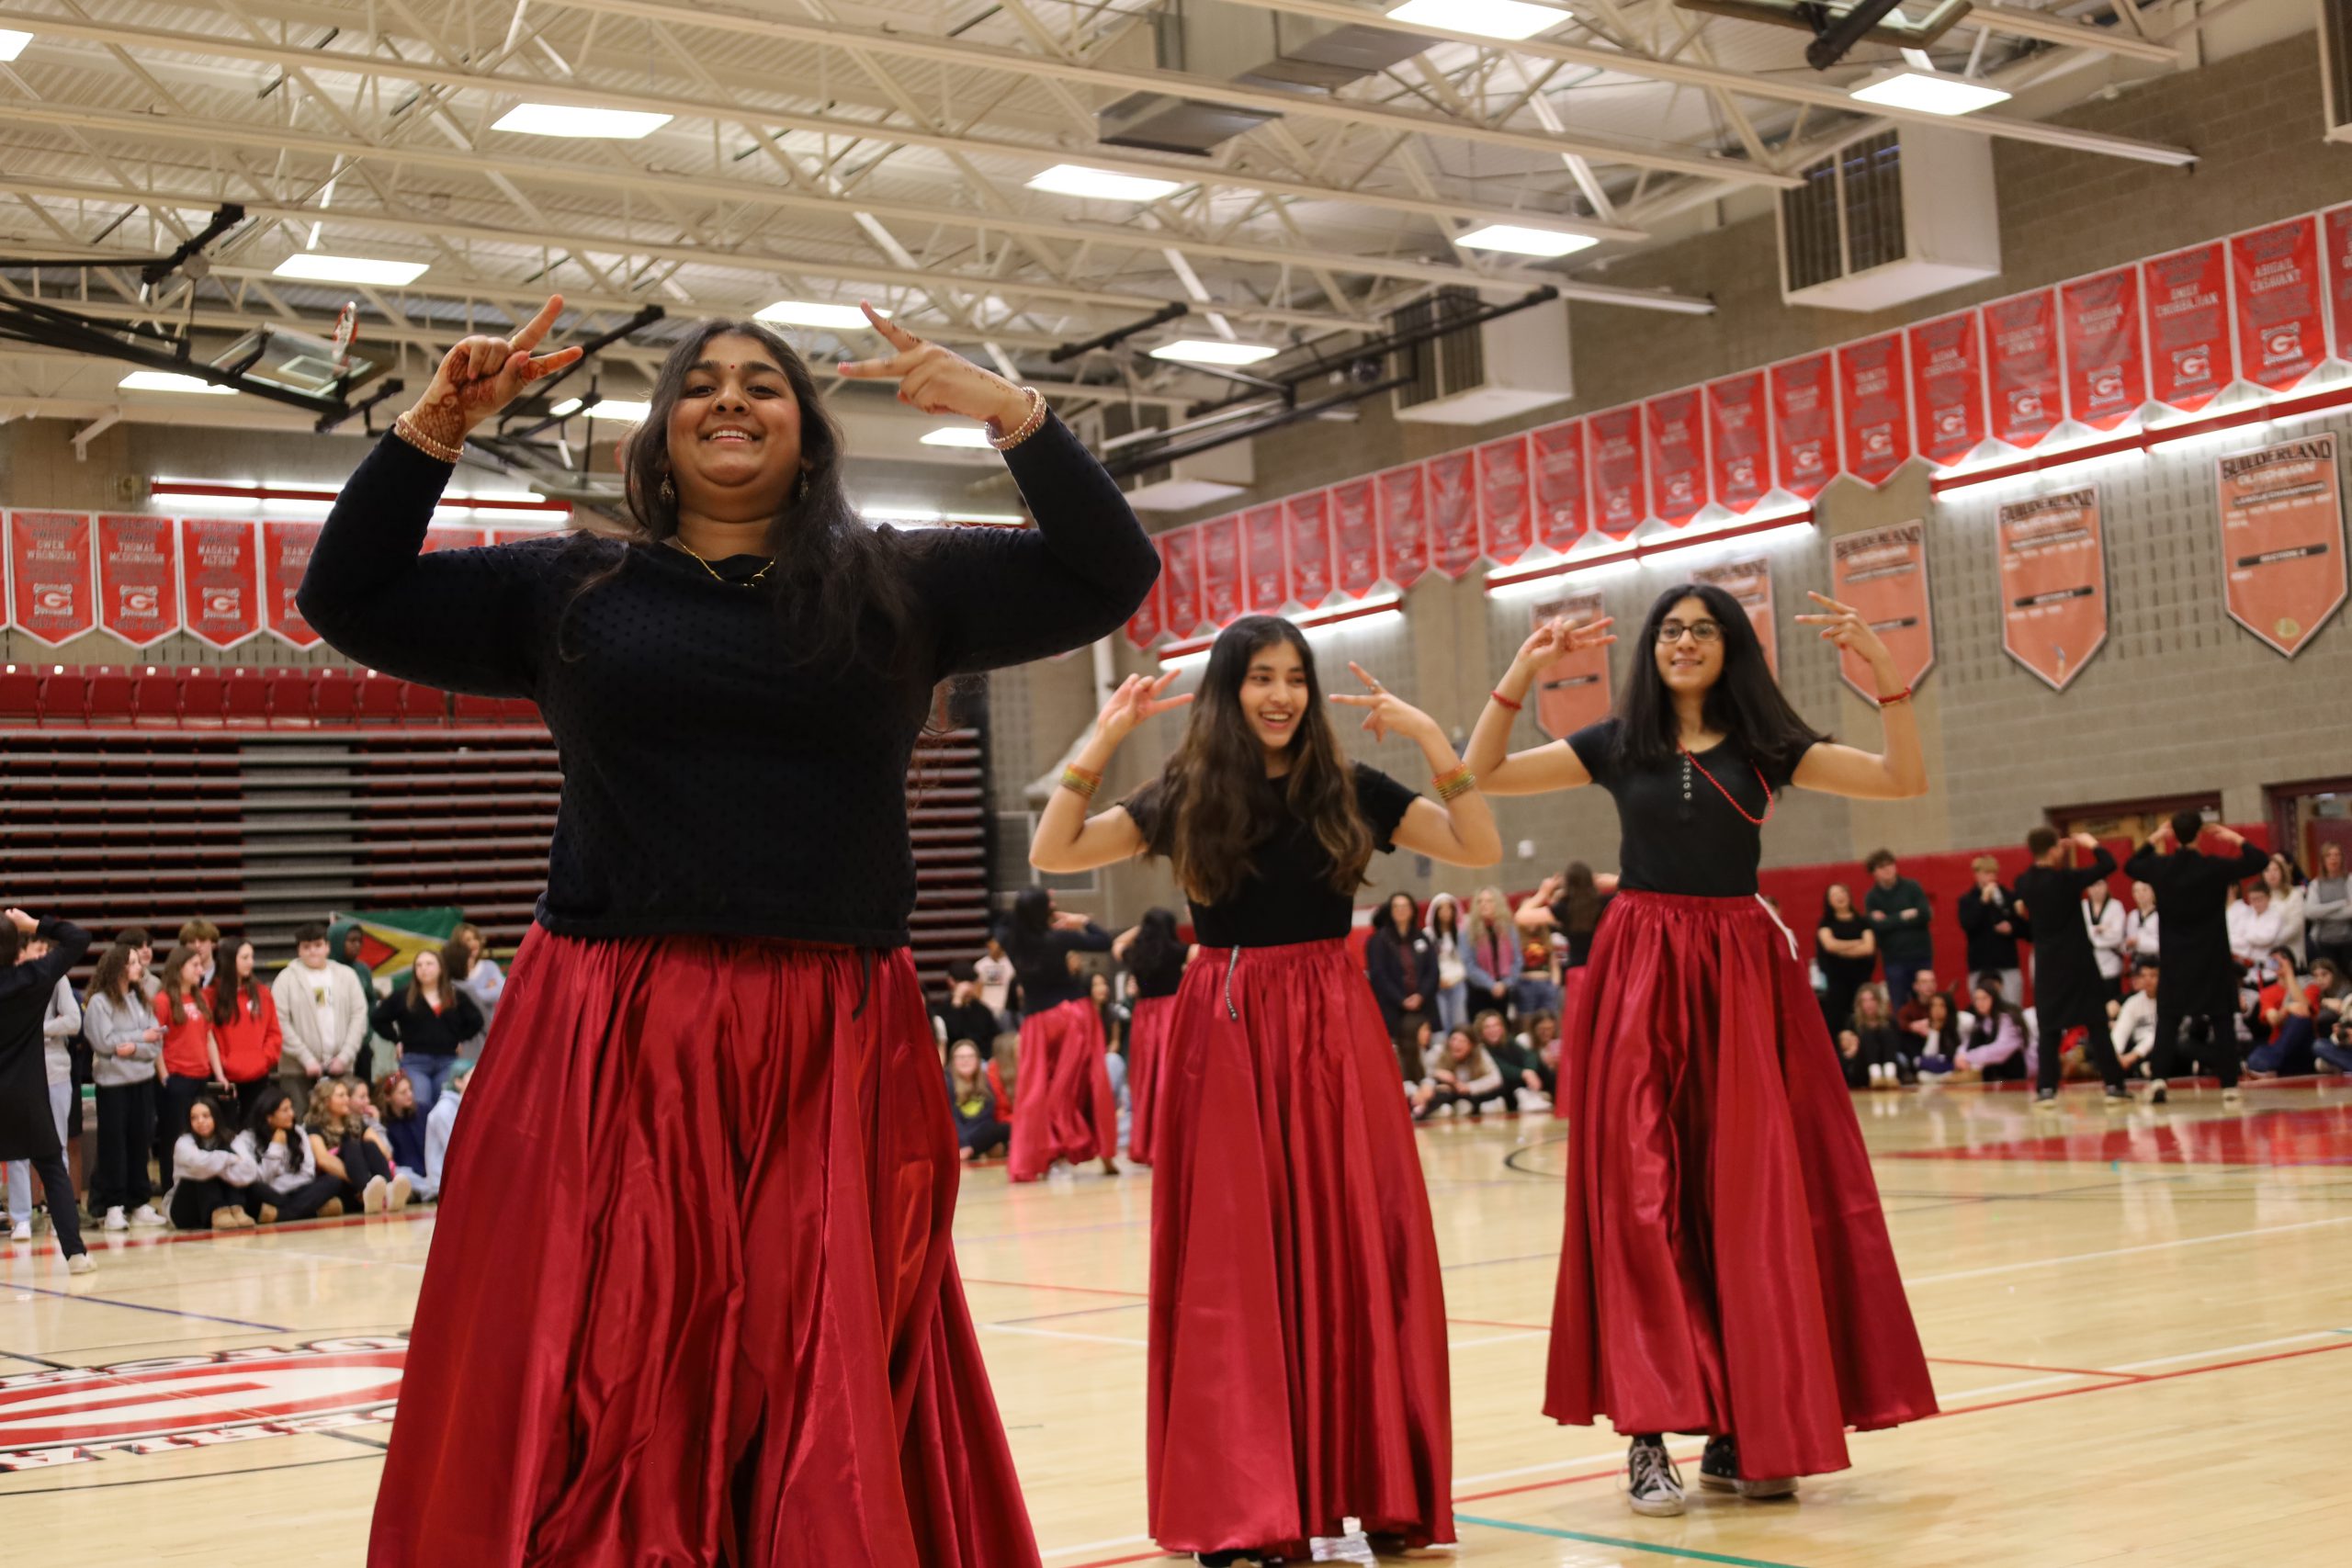 Three students dance in a gym. Their hands are raised, they are wearing black shirts with long red skirts